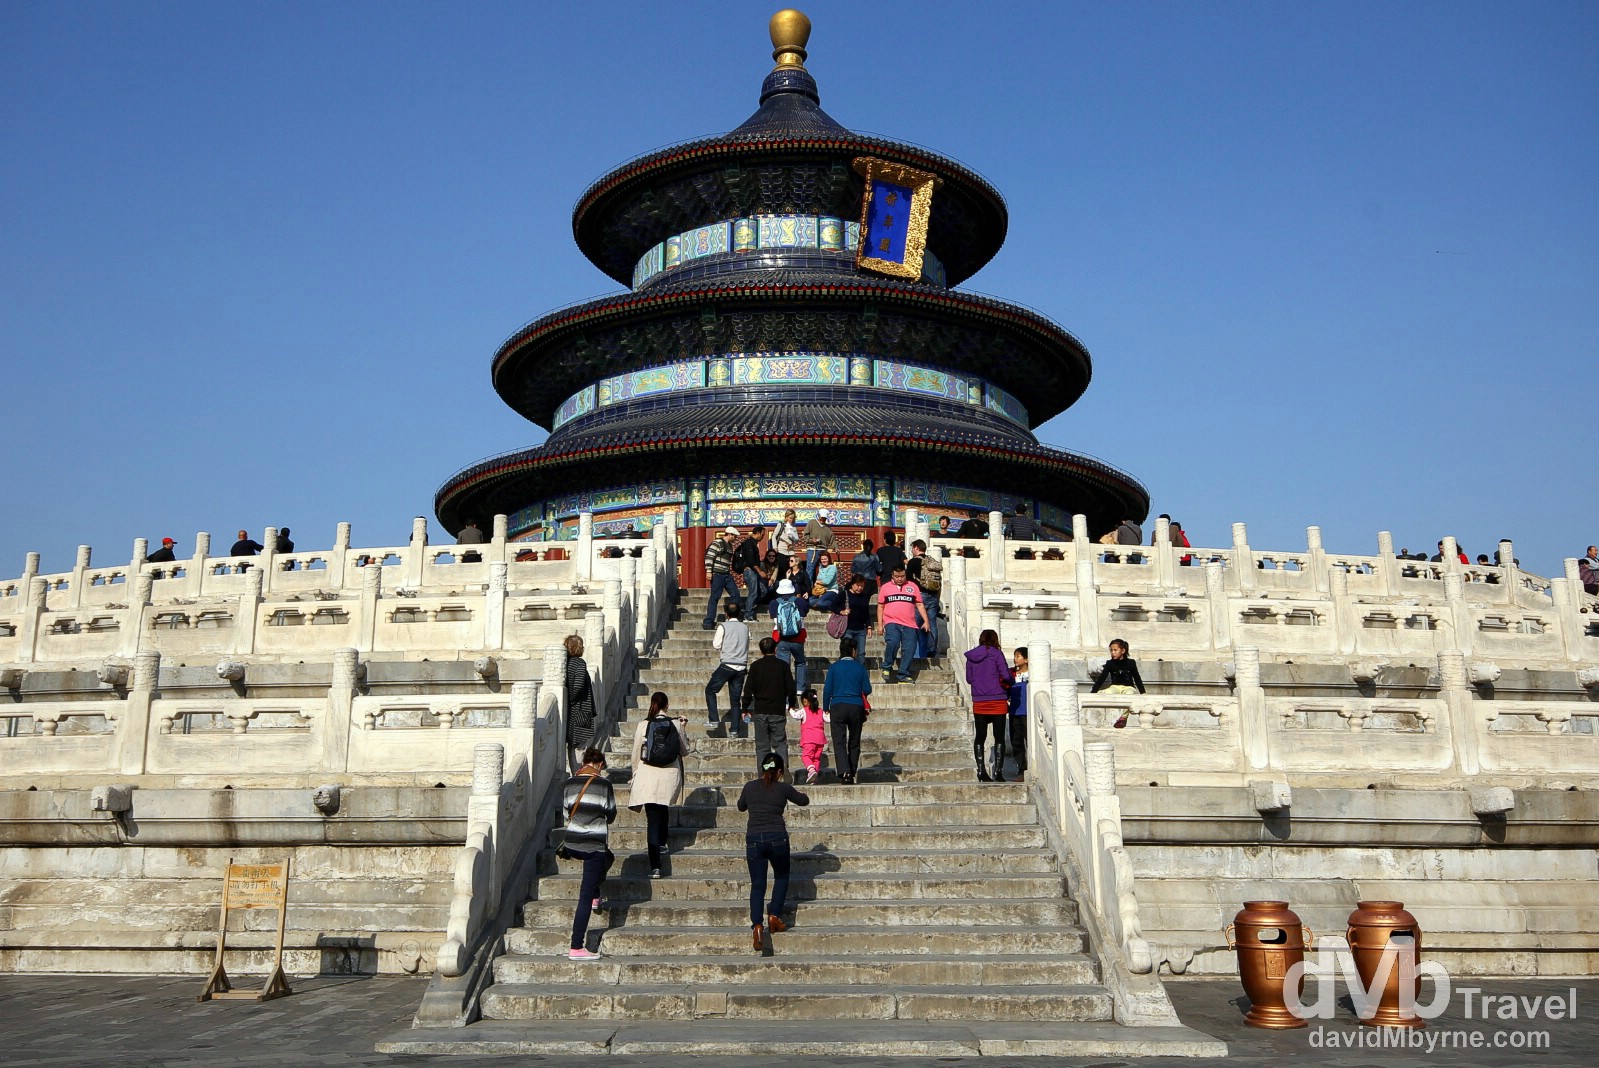 The stunning Hall of Good Harvests, the main structure of the Temple of Heaven complex in Beijing, China. October 27th 2012. 